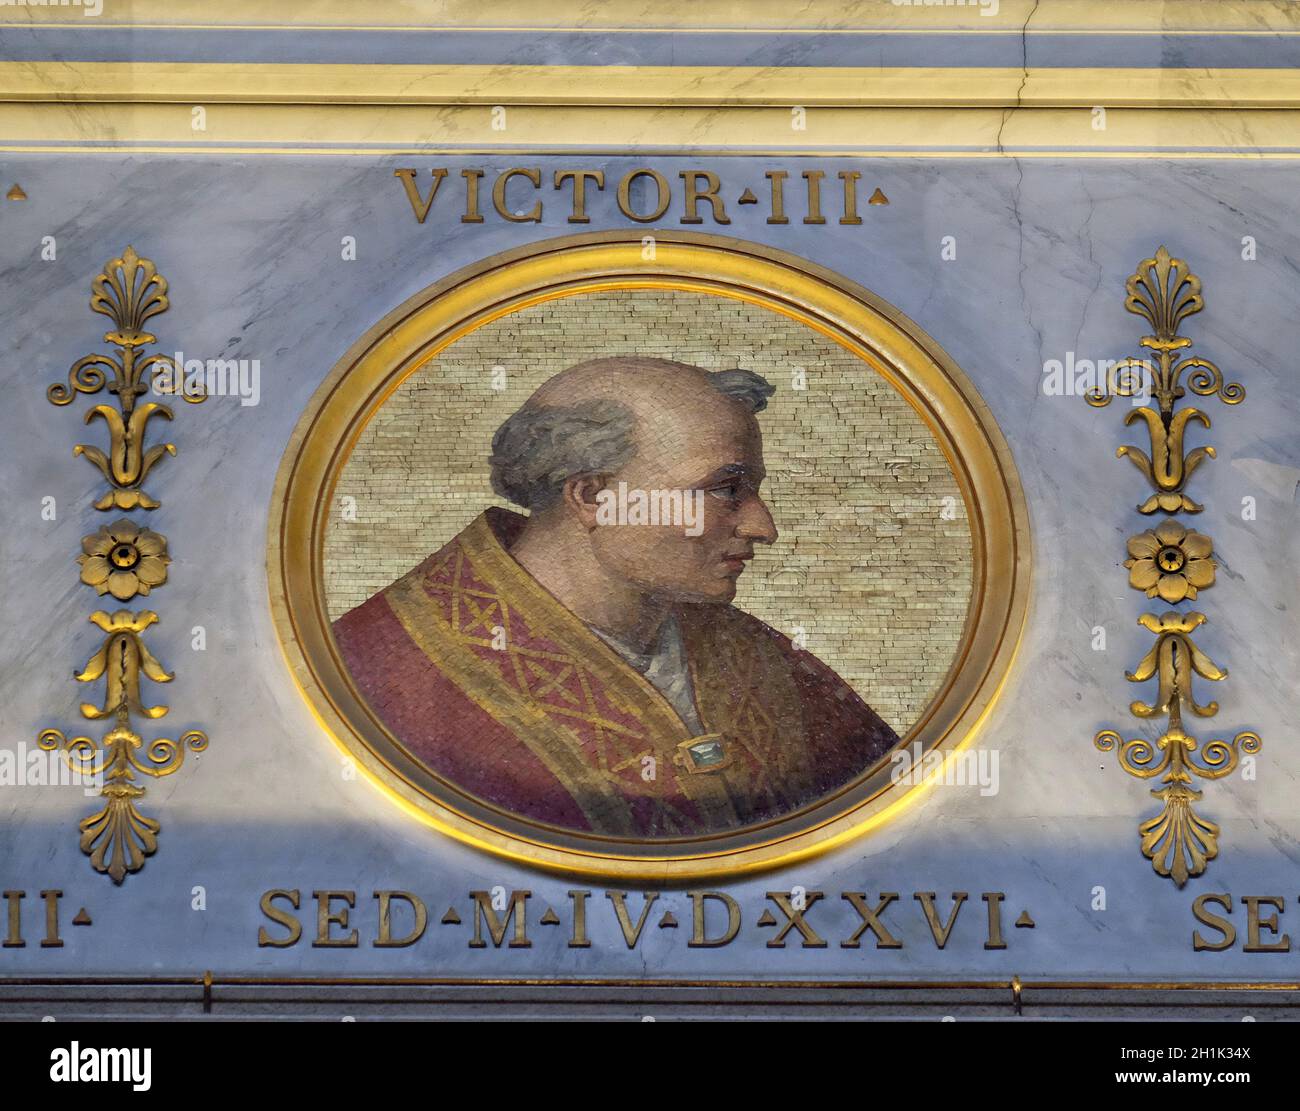 Pope Victor III, born Dauferio, was Pope from 24 May 1086 to his death in 1087, basilica of Saint Paul Outside the Walls, Rome, Italy Stock Photo